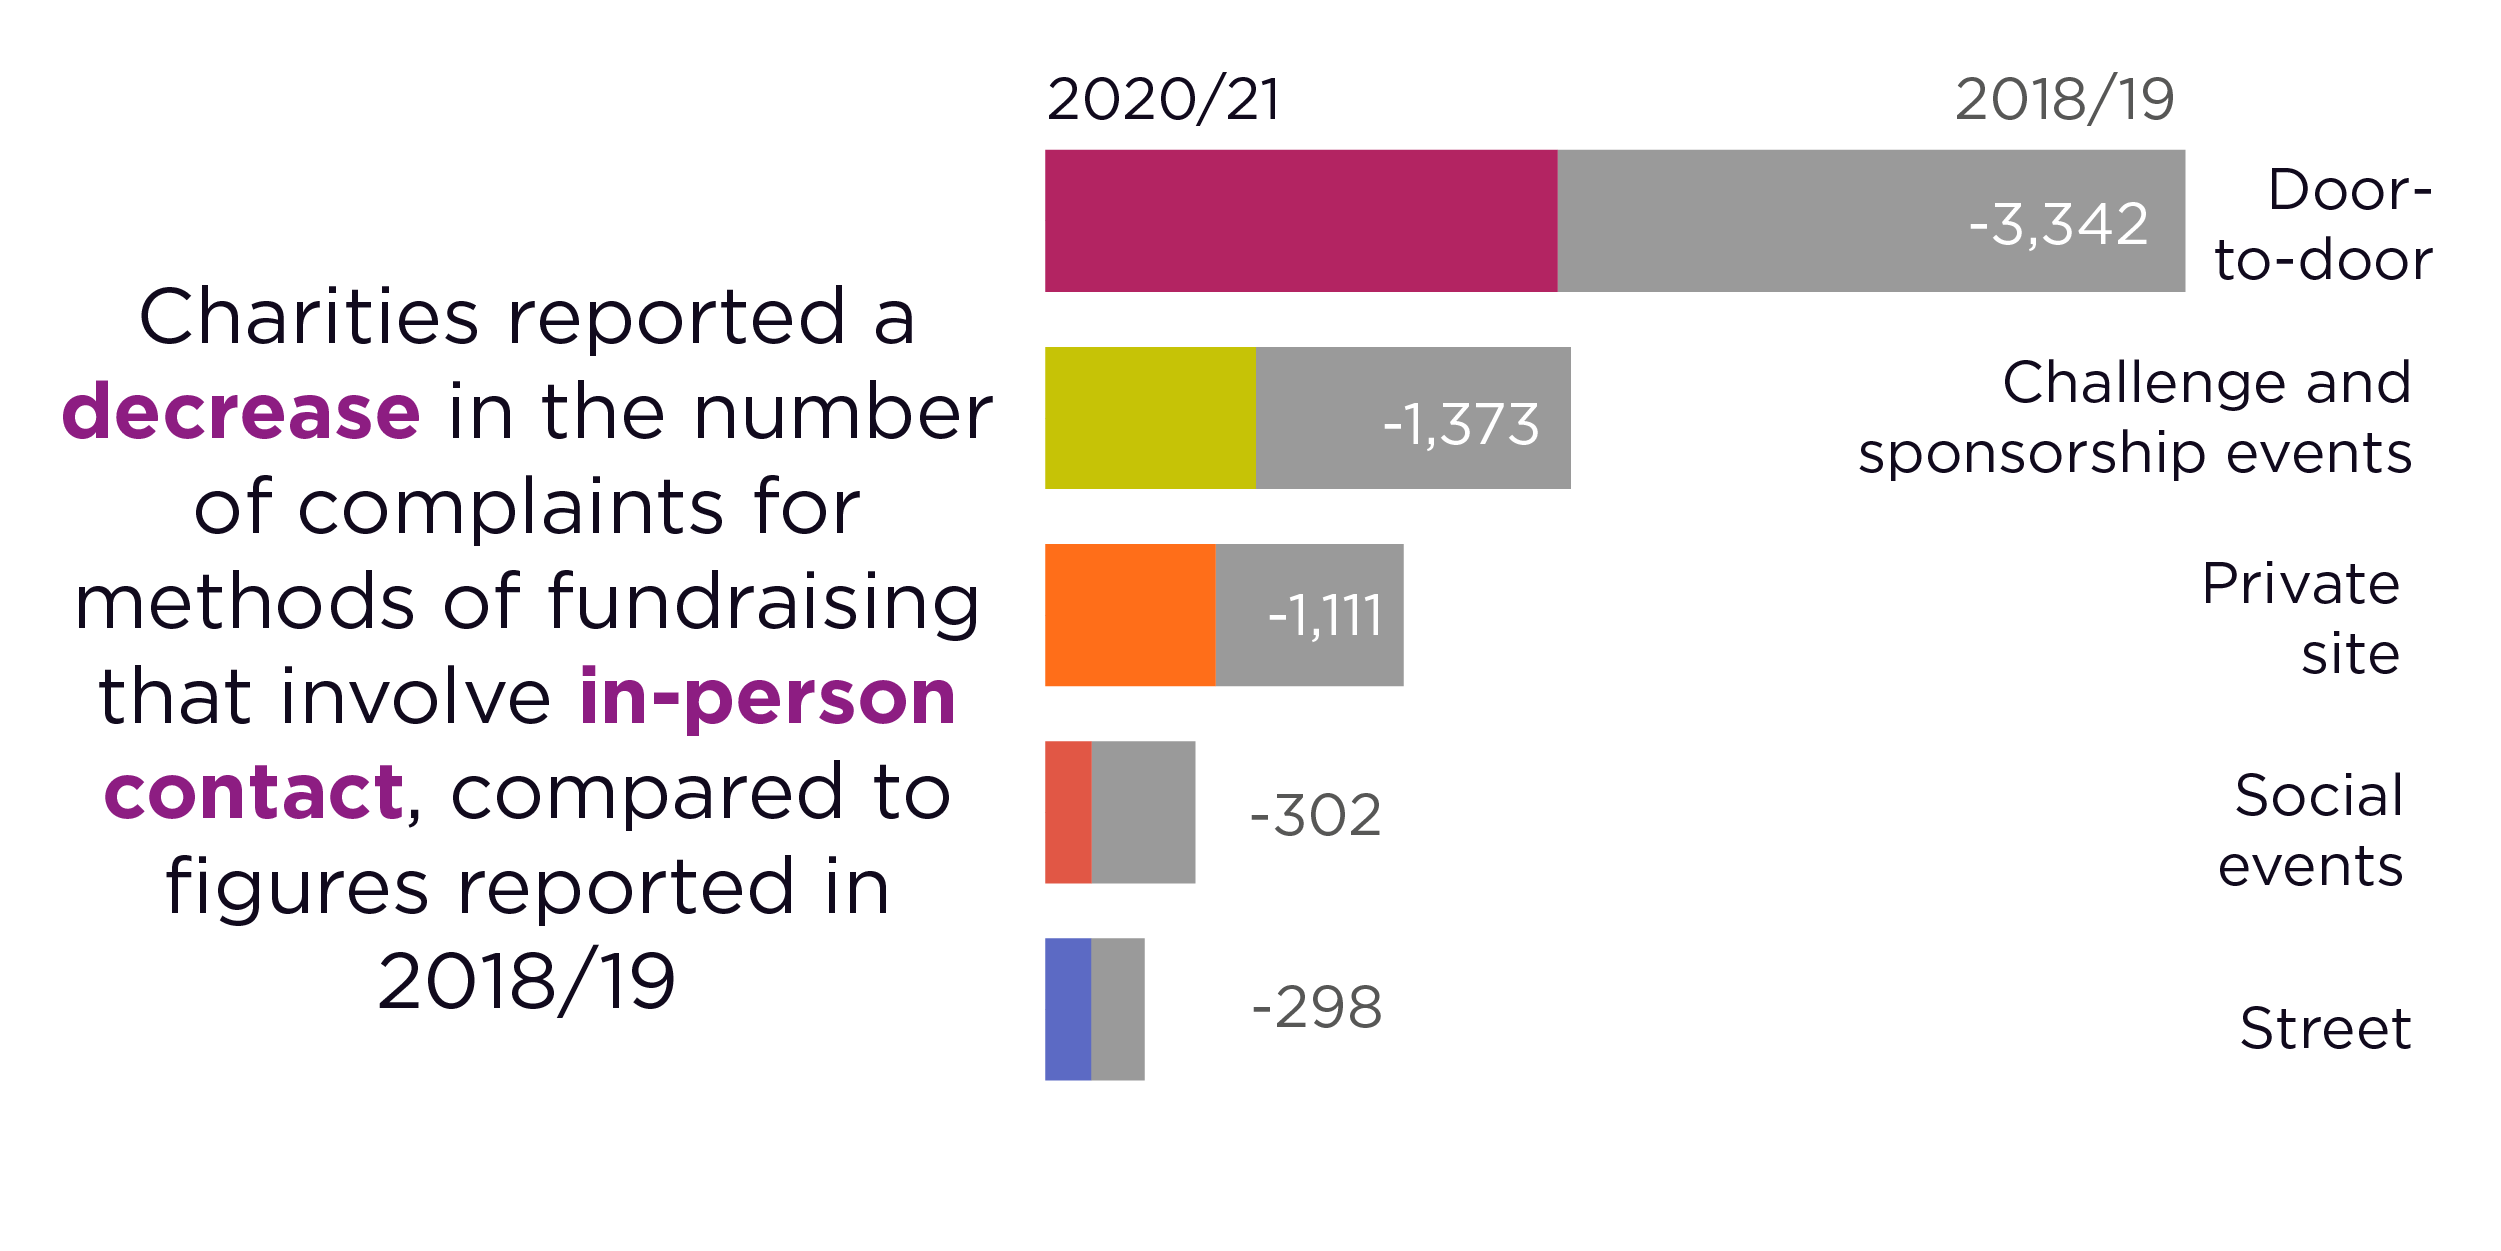 Charities reported a decrease in the number of complaints for methods of fundraising that involve in-person contact, compared to figures reported in 2018/19